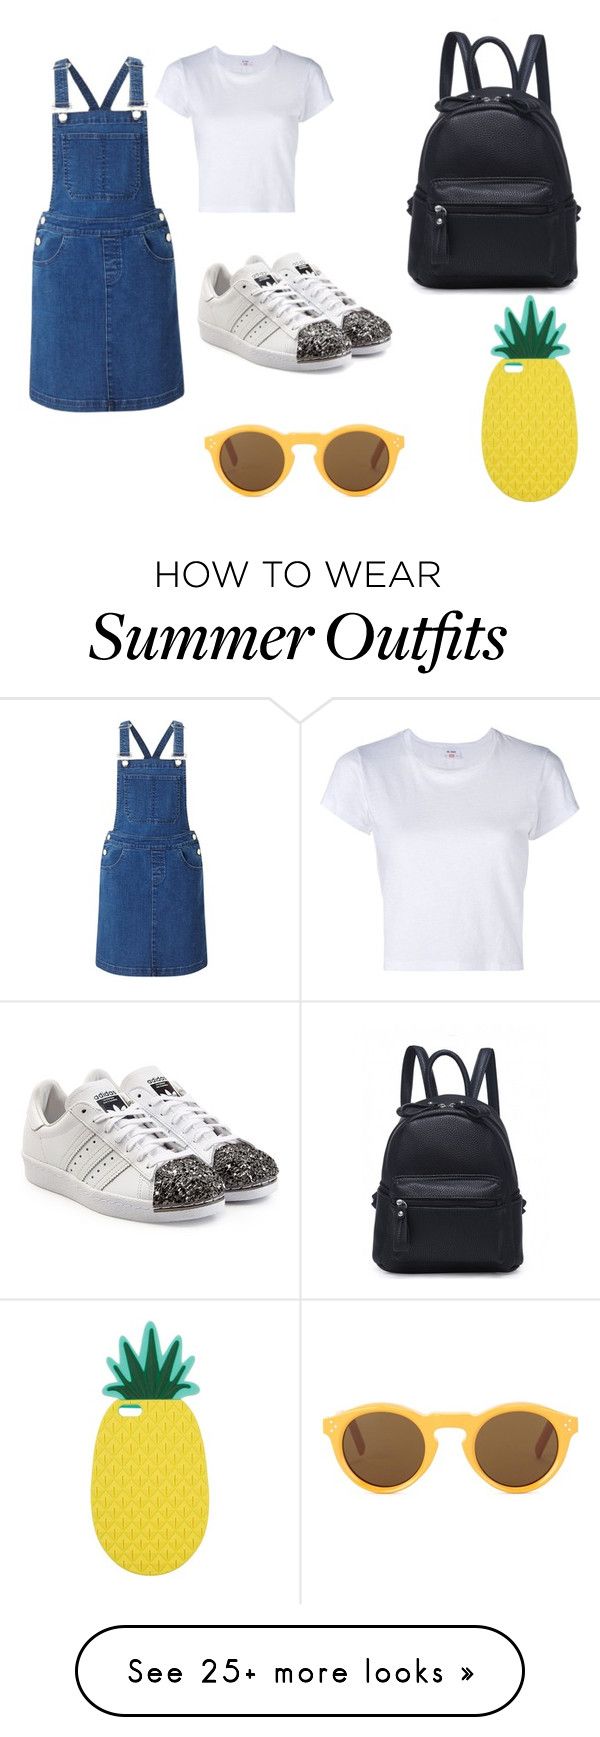 "Cute summer shopping outfit" by rosiealiceneal on Polyvore featuring ...